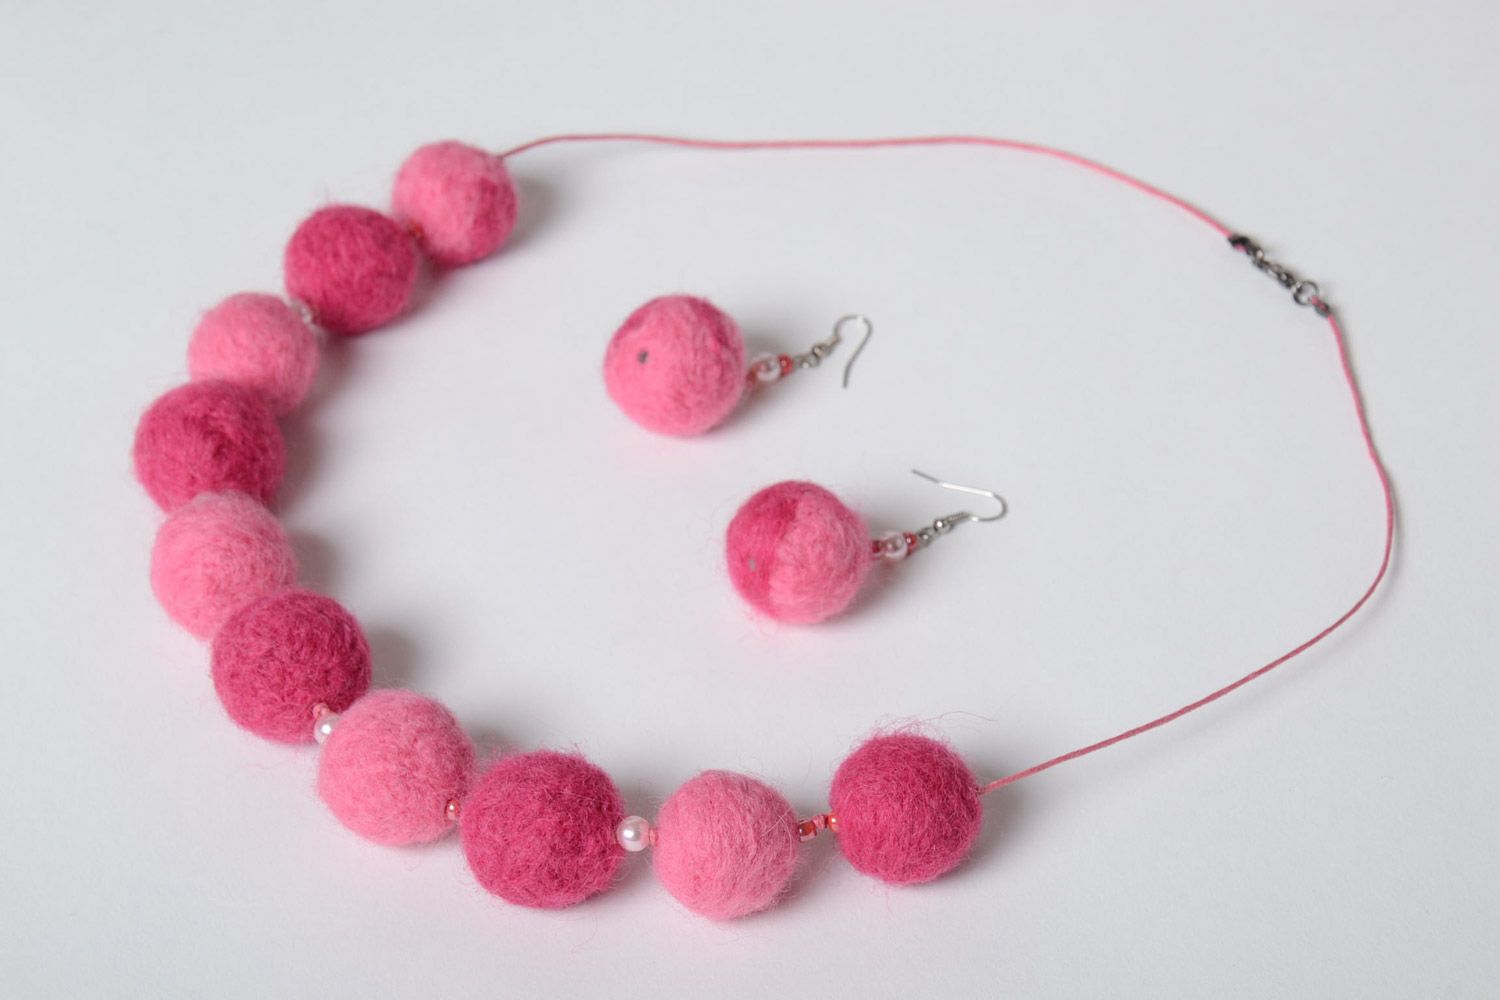 Handmade felted wool jewelry set 2 items pink ball necklace and earrings photo 2